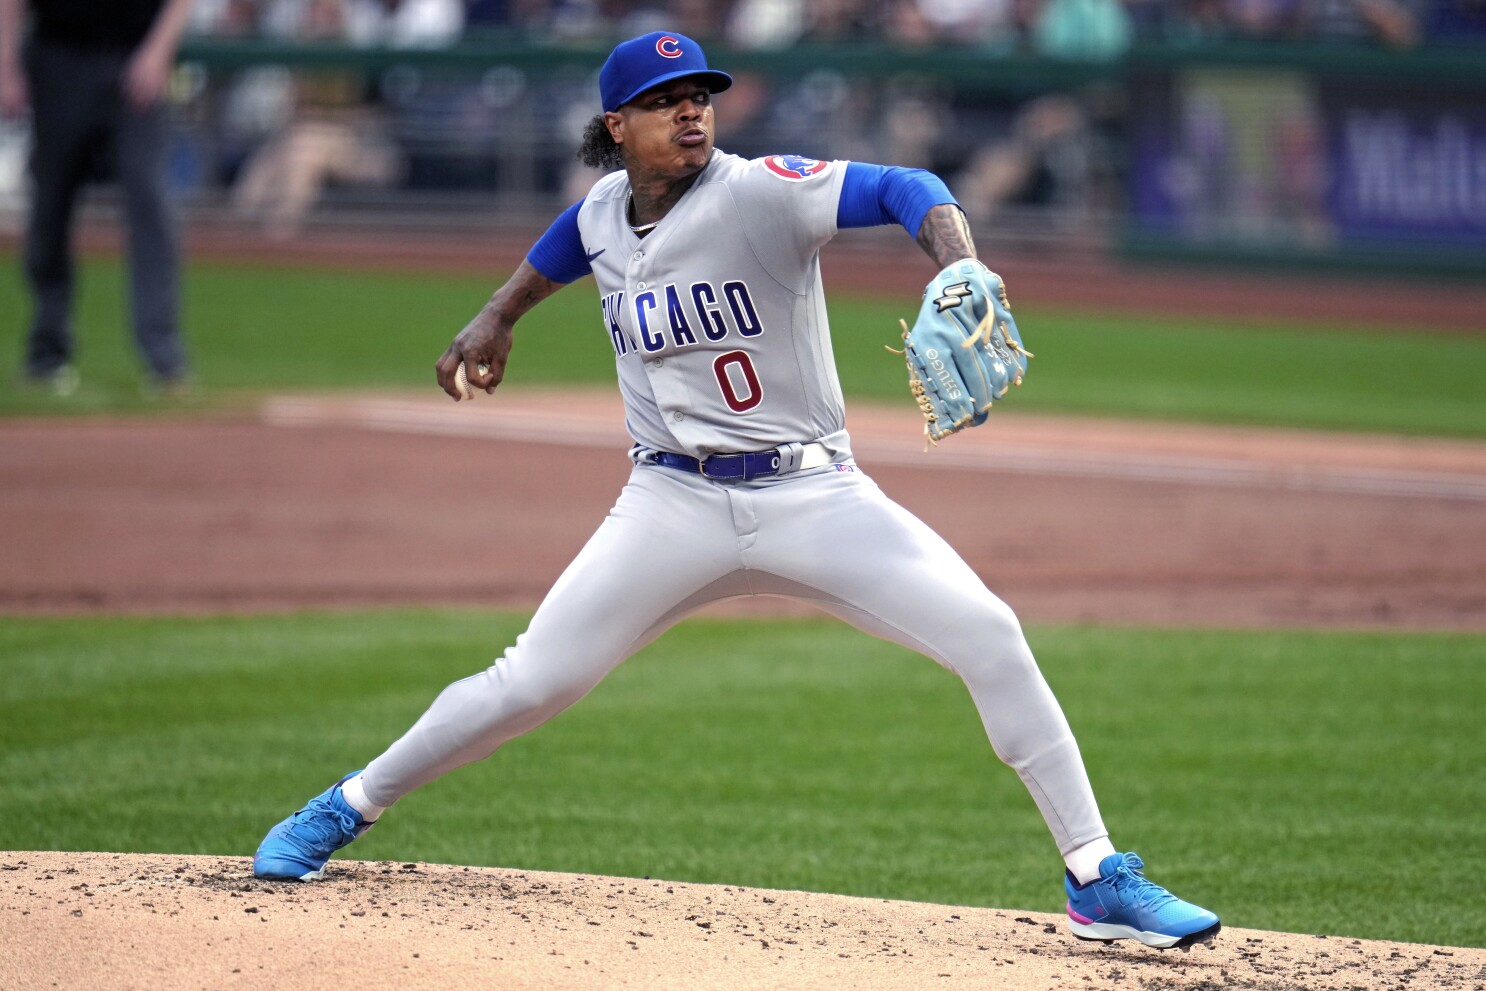 Stroman delivers another quality start as Cubs shut out Pirates 4-0